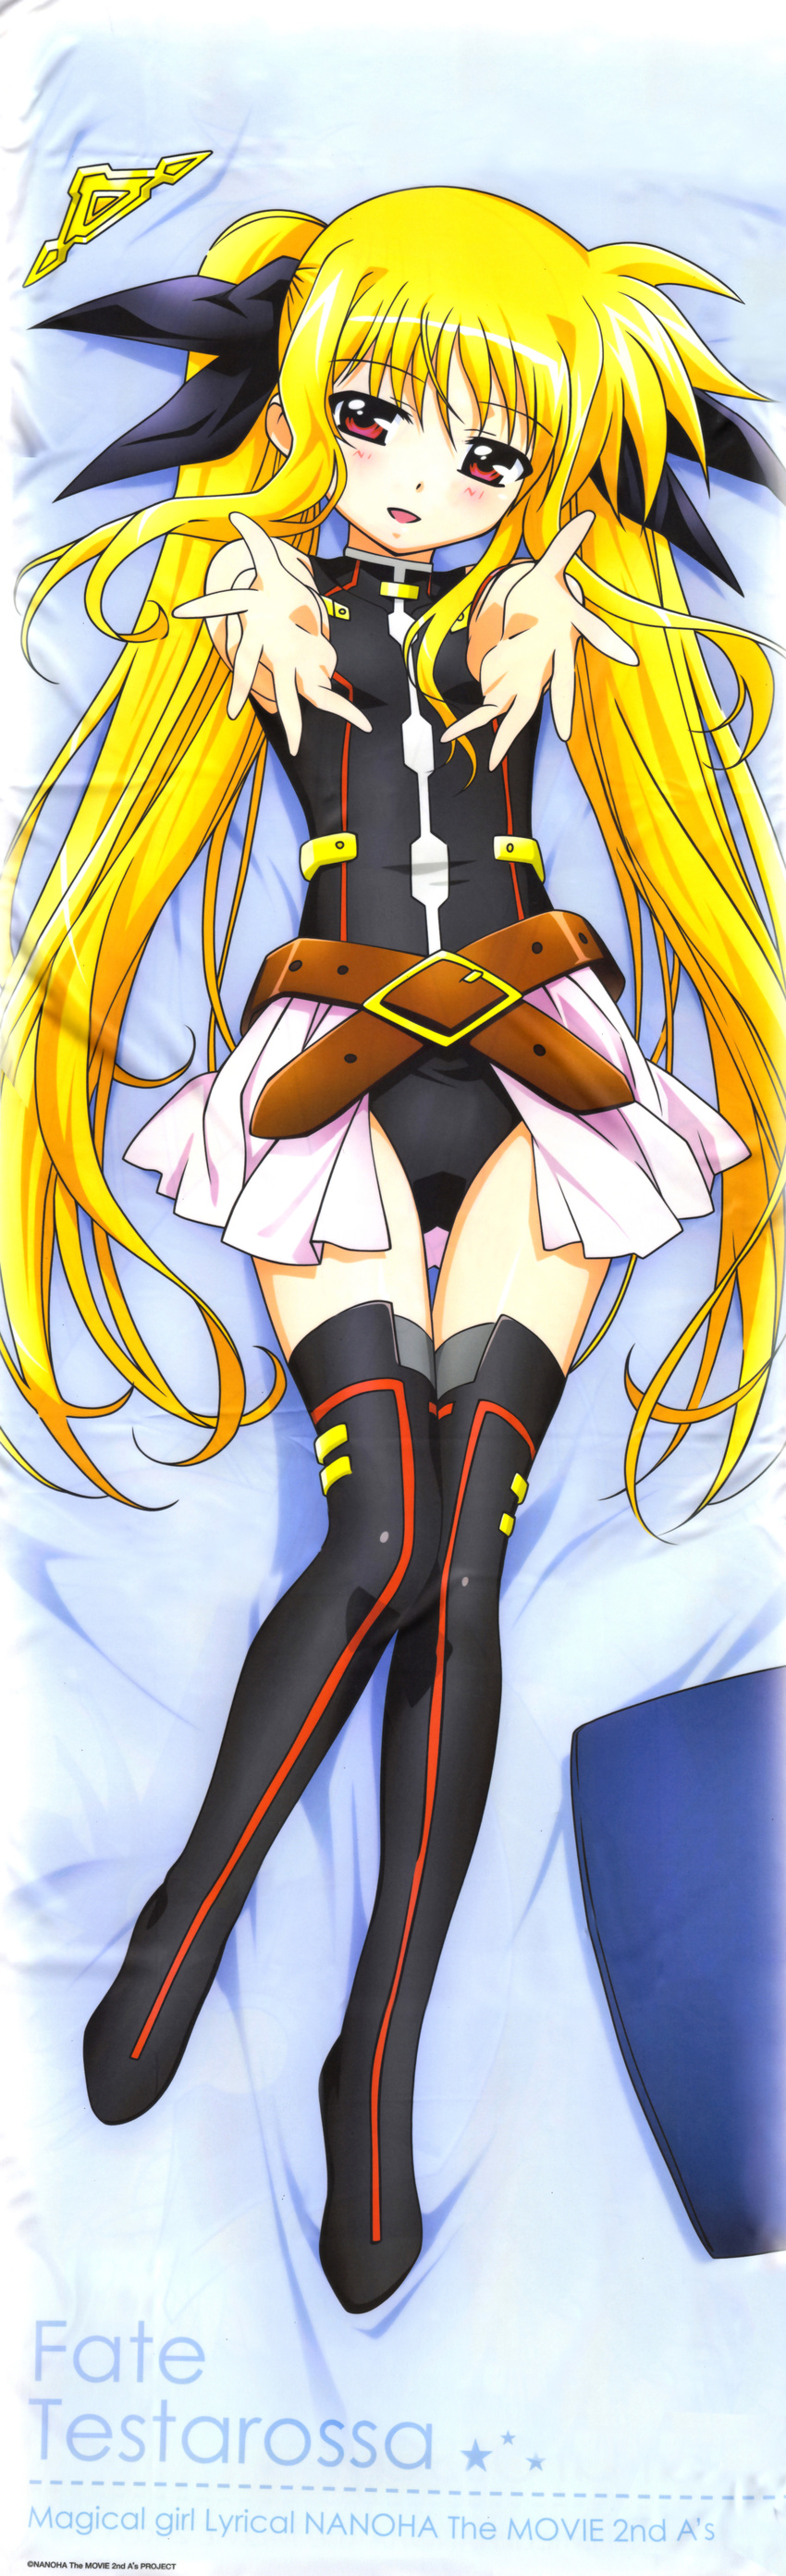 1girl absurdres bardiche belt blonde_hair blush bodysuit bow buckle character_name copyright_name crease dakimakura fate_testarossa hair_bow highres incredibly_absurdres long_hair long_image lyrical_nanoha magical_girl mahou_shoujo_lyrical_nanoha mahou_shoujo_lyrical_nanoha_a's mahou_shoujo_lyrical_nanoha_a's mahou_shoujo_lyrical_nanoha_the_movie_2nd_a's mahou_shoujo_lyrical_nanoha_the_movie_2nd_a's outstretched_arms red_eyes scan skirt solo star tall_image thighhighs title_drop twintails